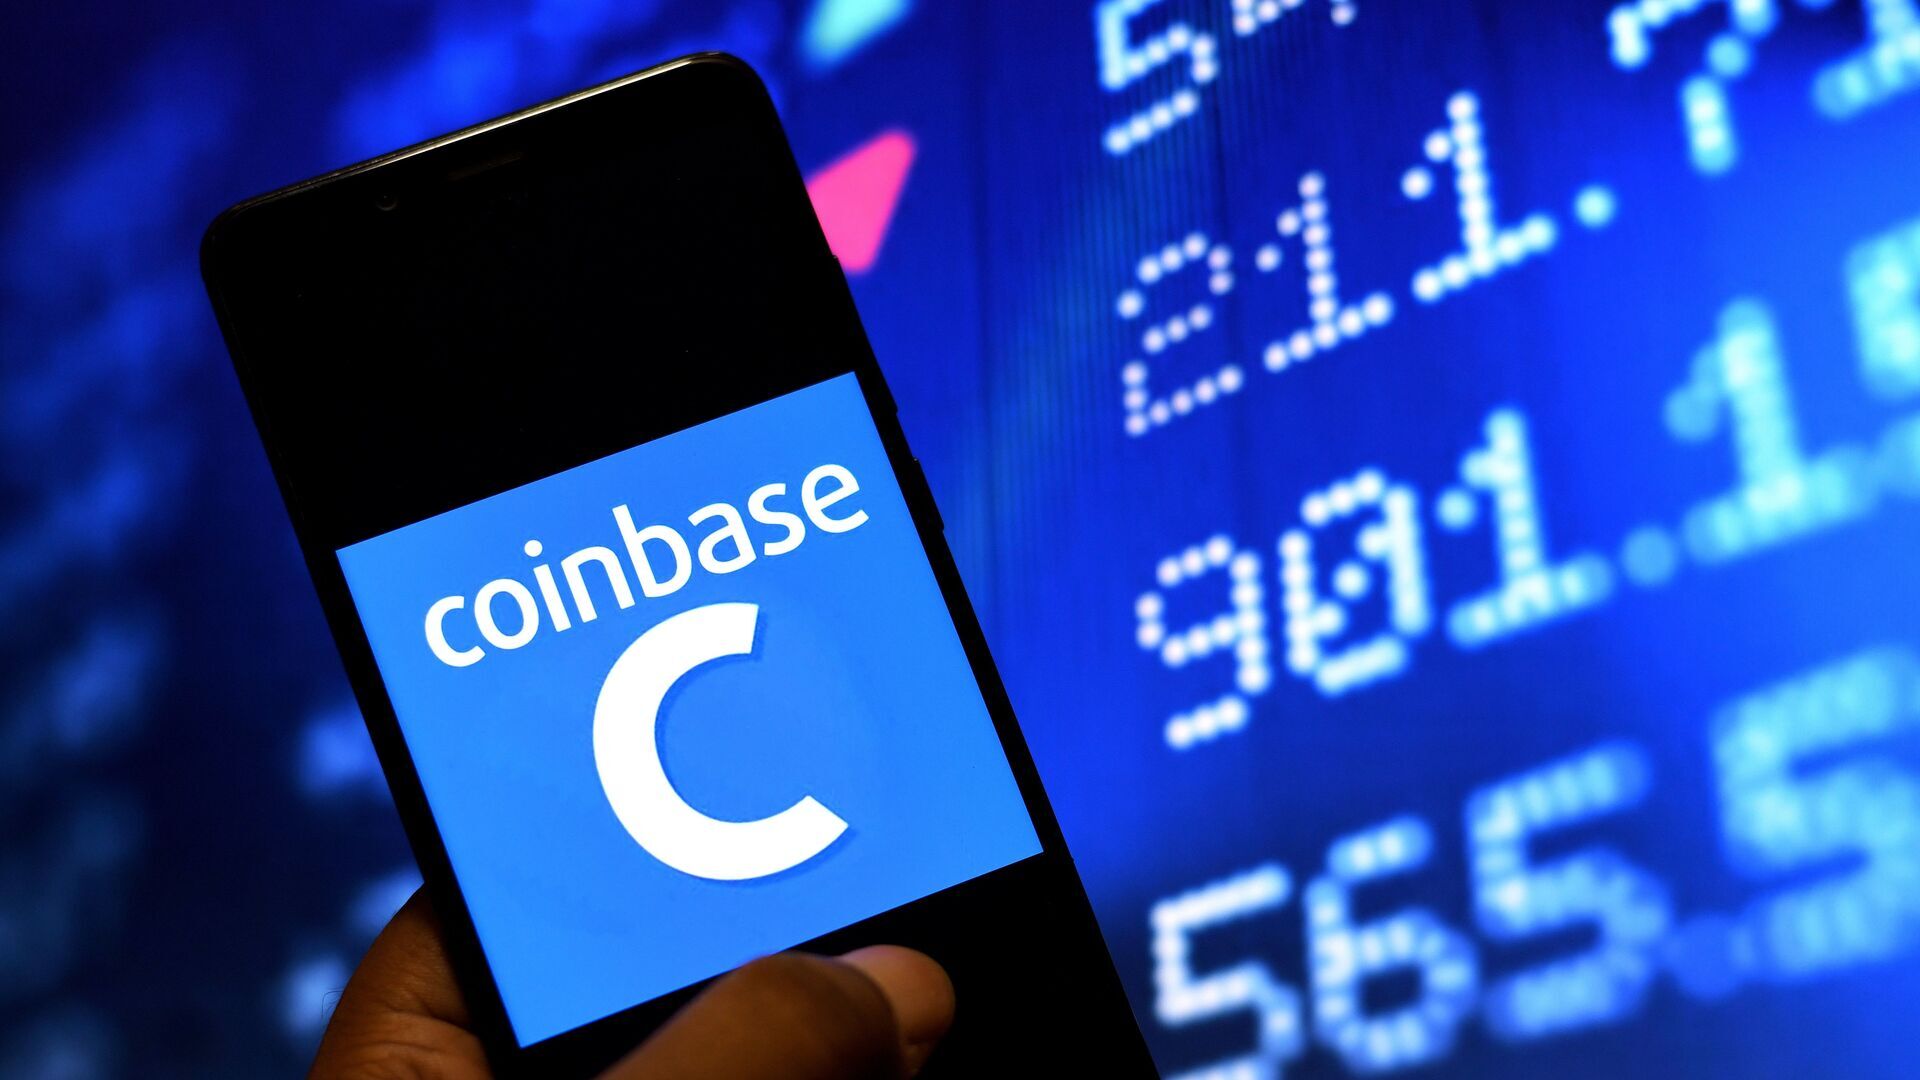 Coinbase Has Delayed Hiring Due To Current Market Downturn 2